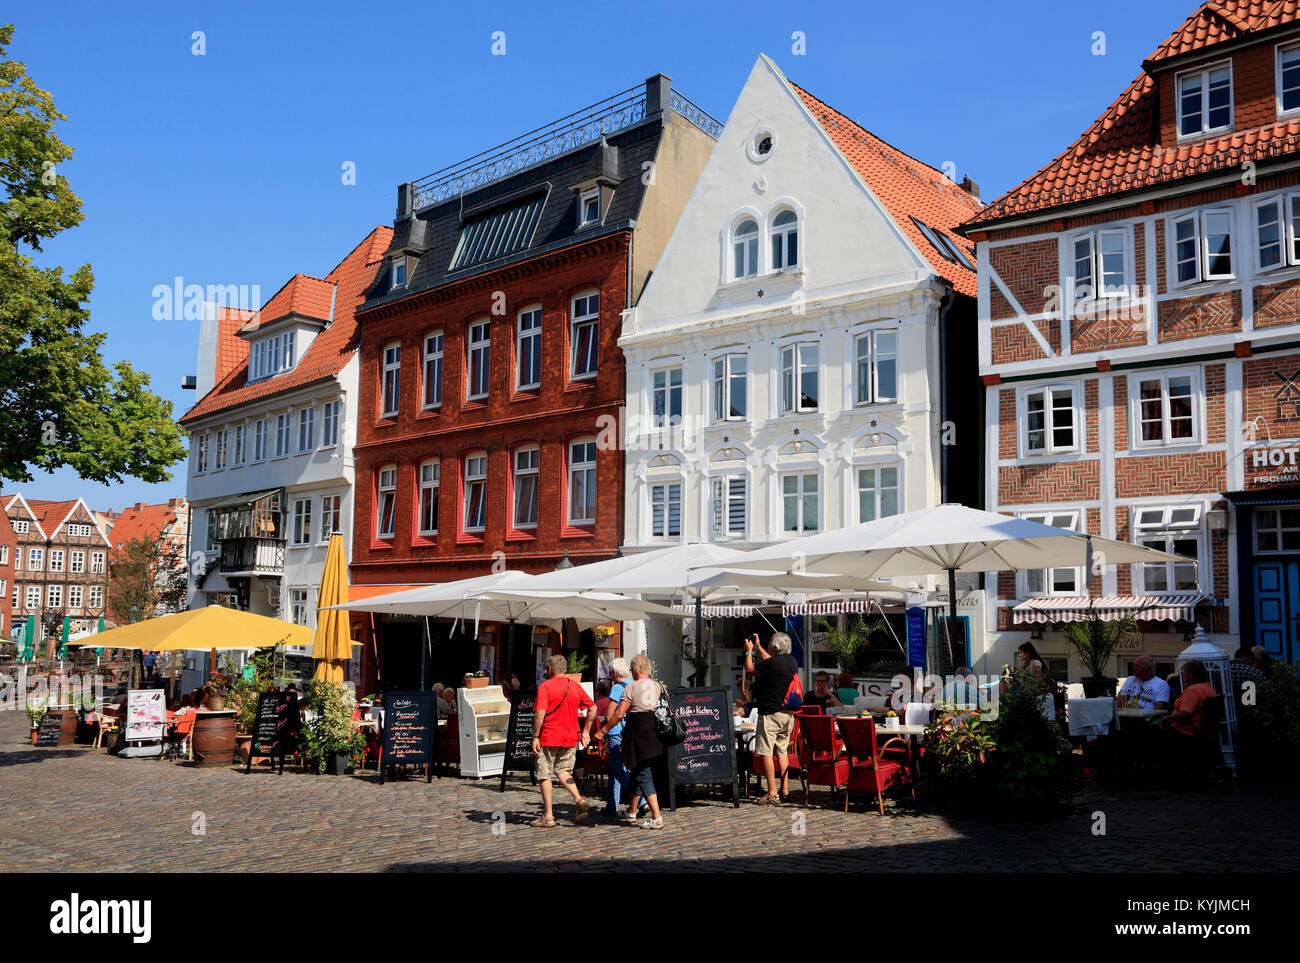 Cafes at Fischmarkt in the historic harbor of Stade, Altes Land, Lower Saxony, Germany Stock Photo